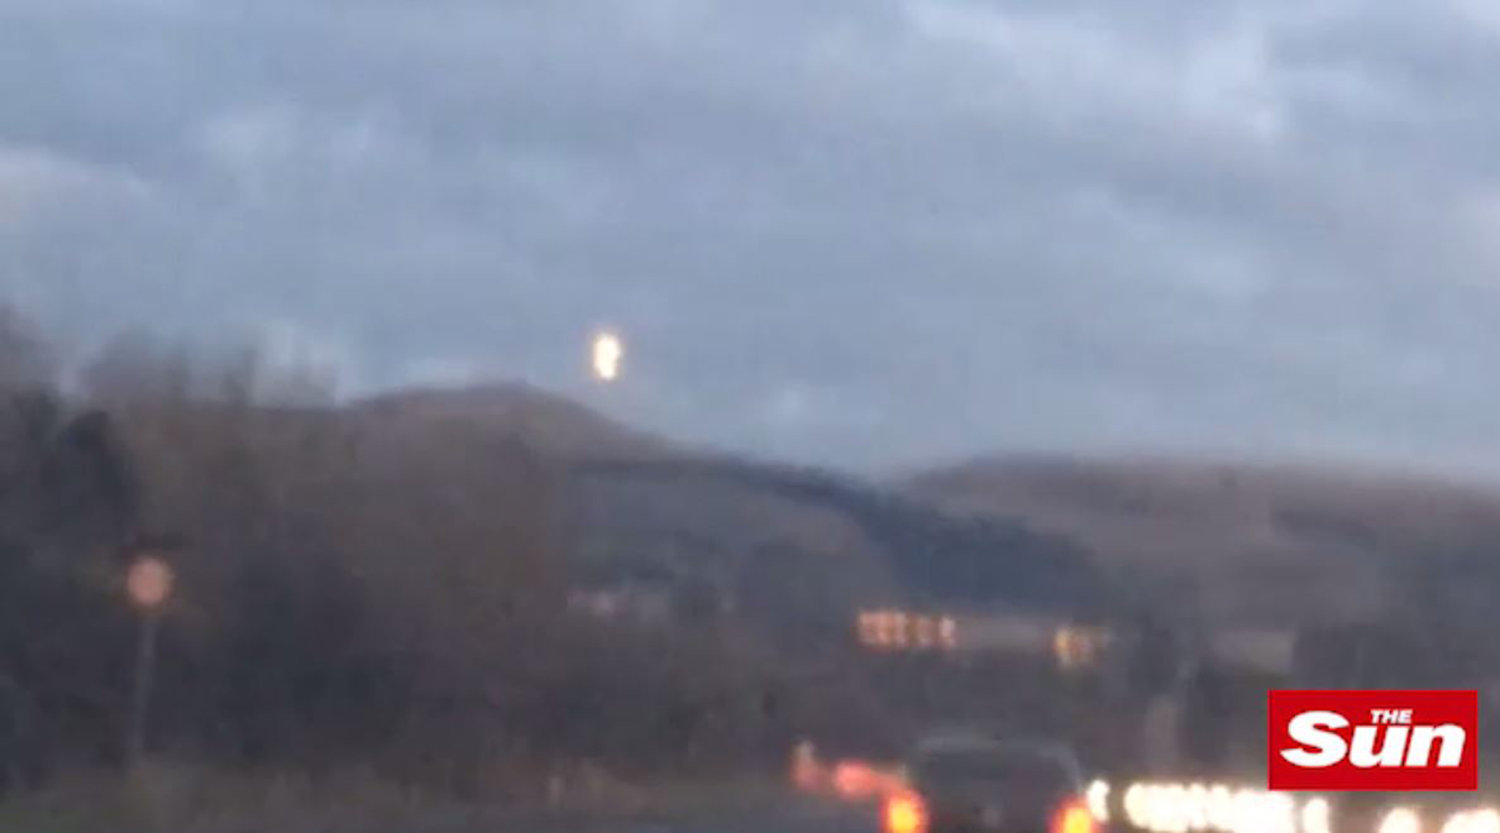 mysterious lights were spotted over Scotland 